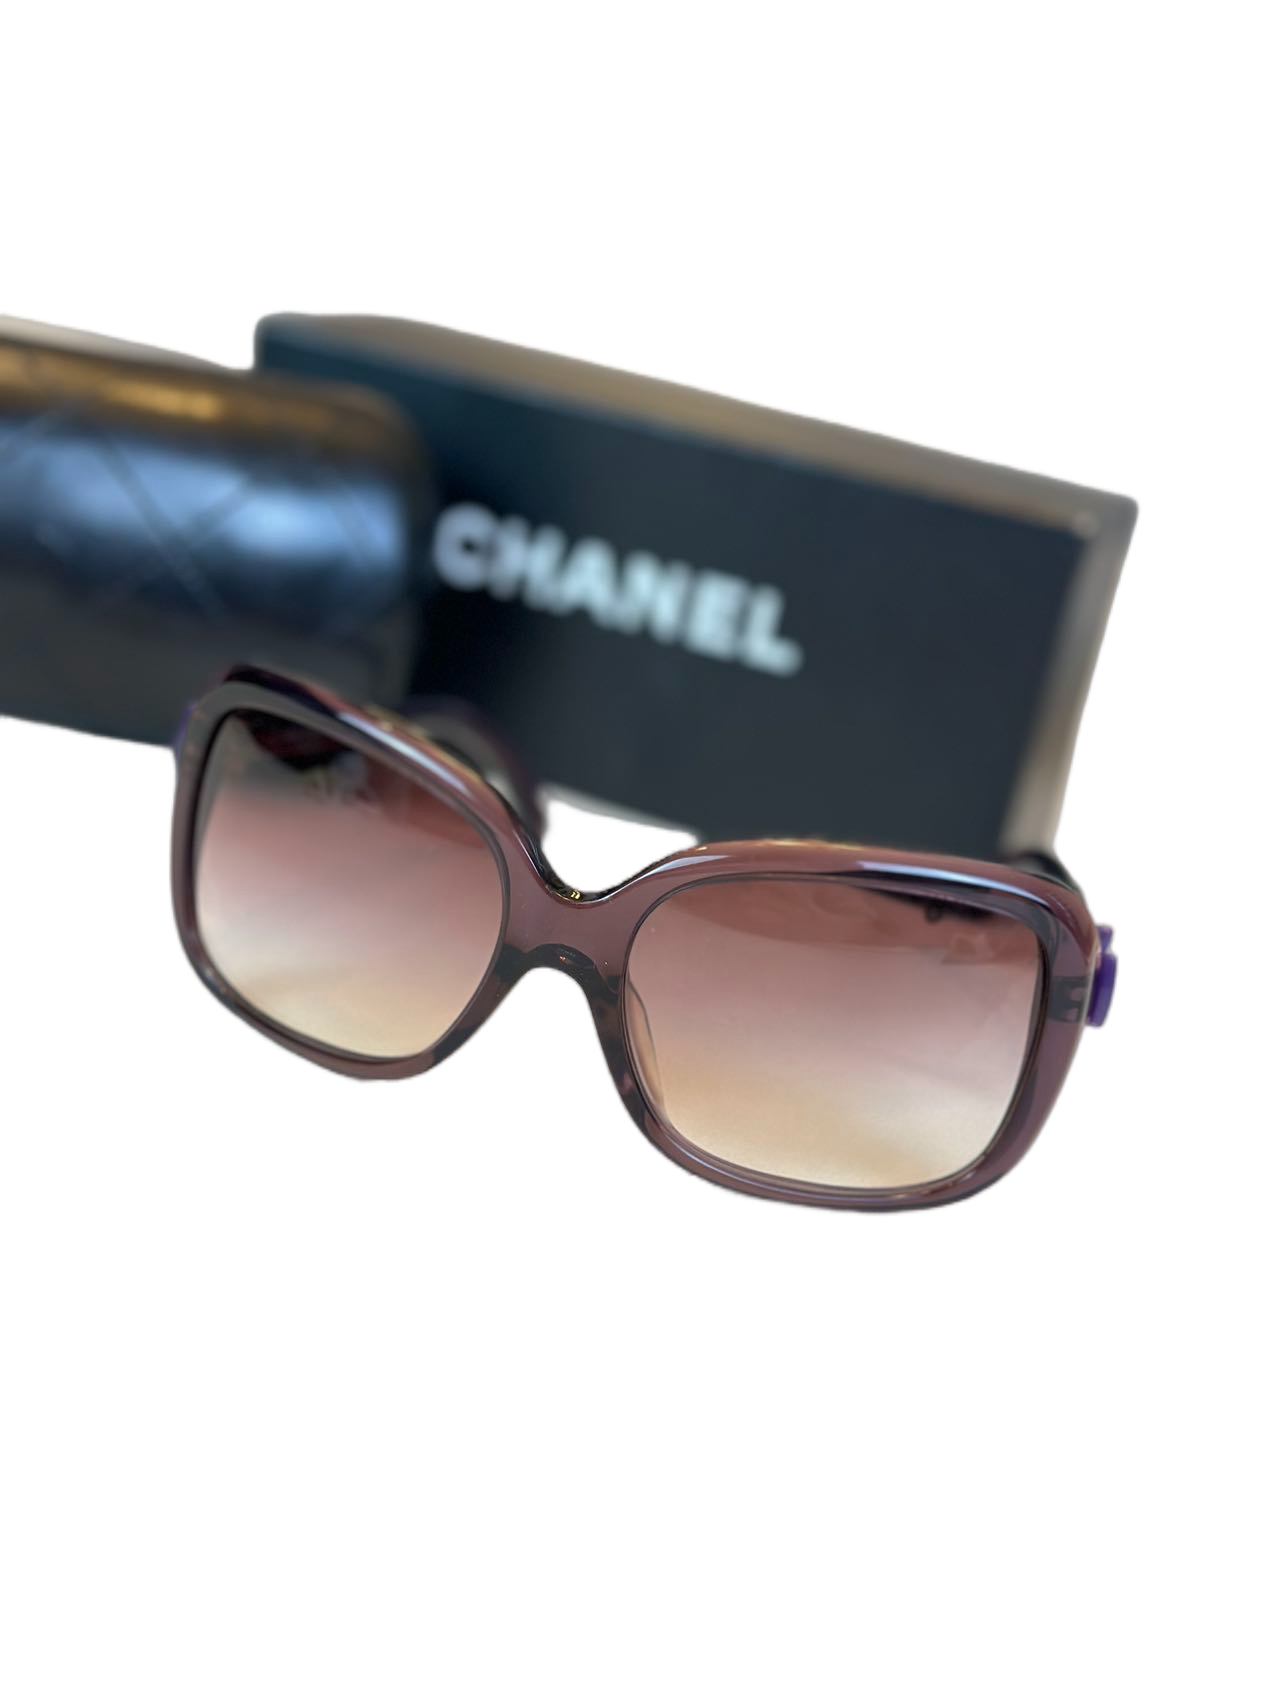 Preloved Chanel Fashionable Sunglasses With Bow Tie On the side